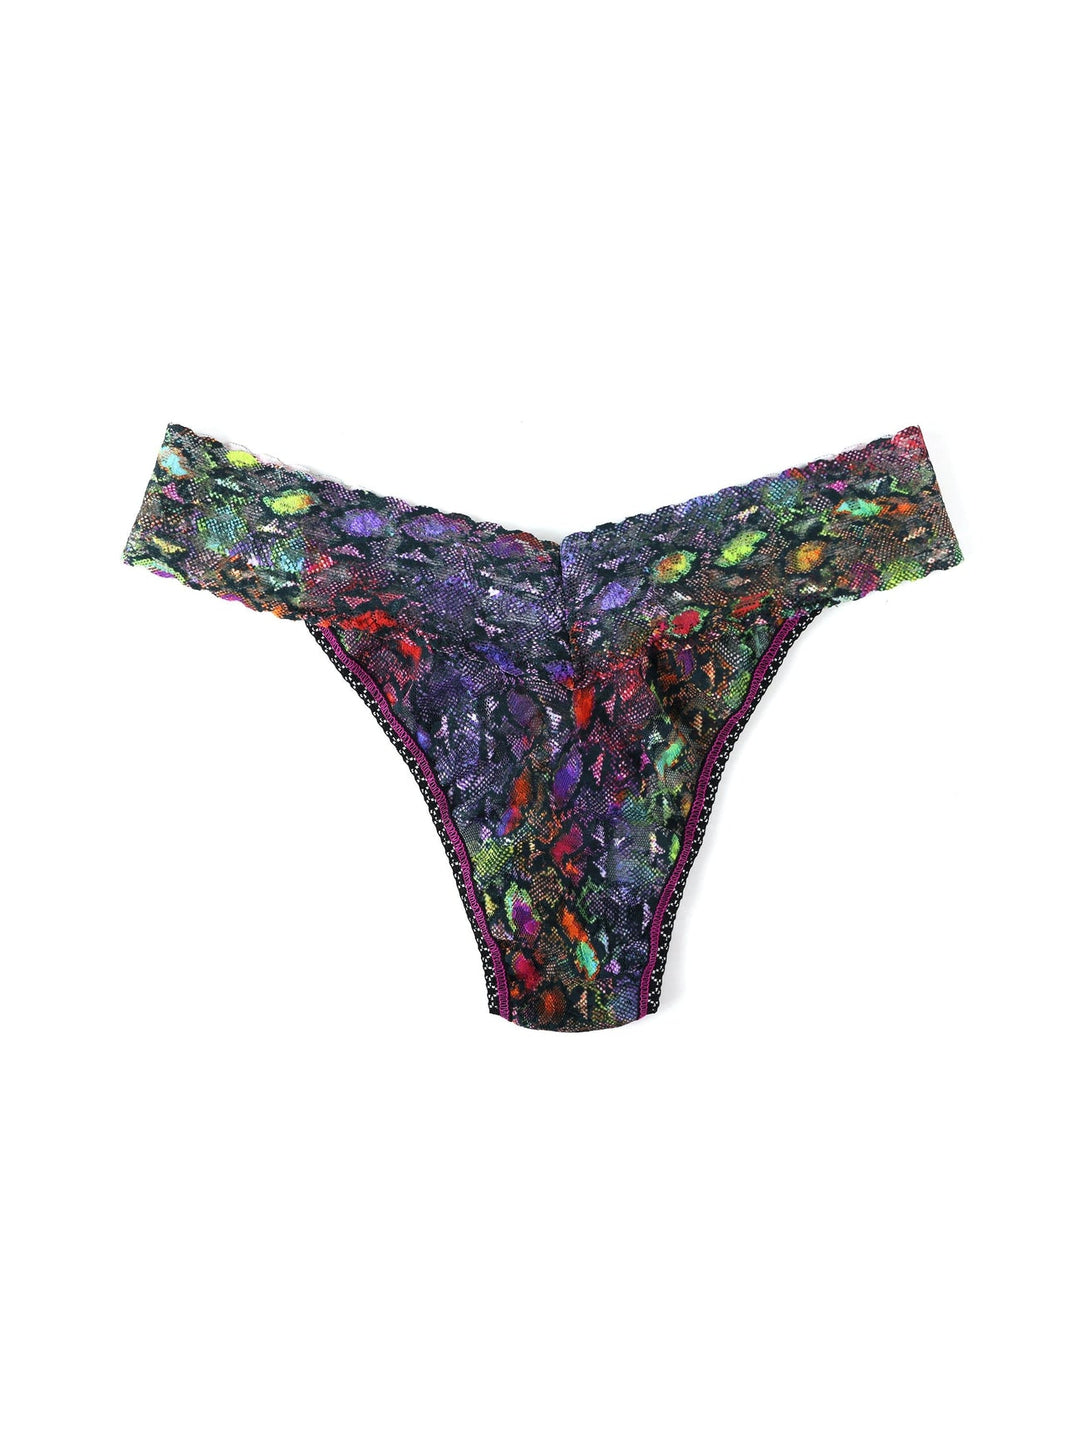 RainBoa Signature Lace Thong by Hanky Panky Made in USA - Clearance Final Sale